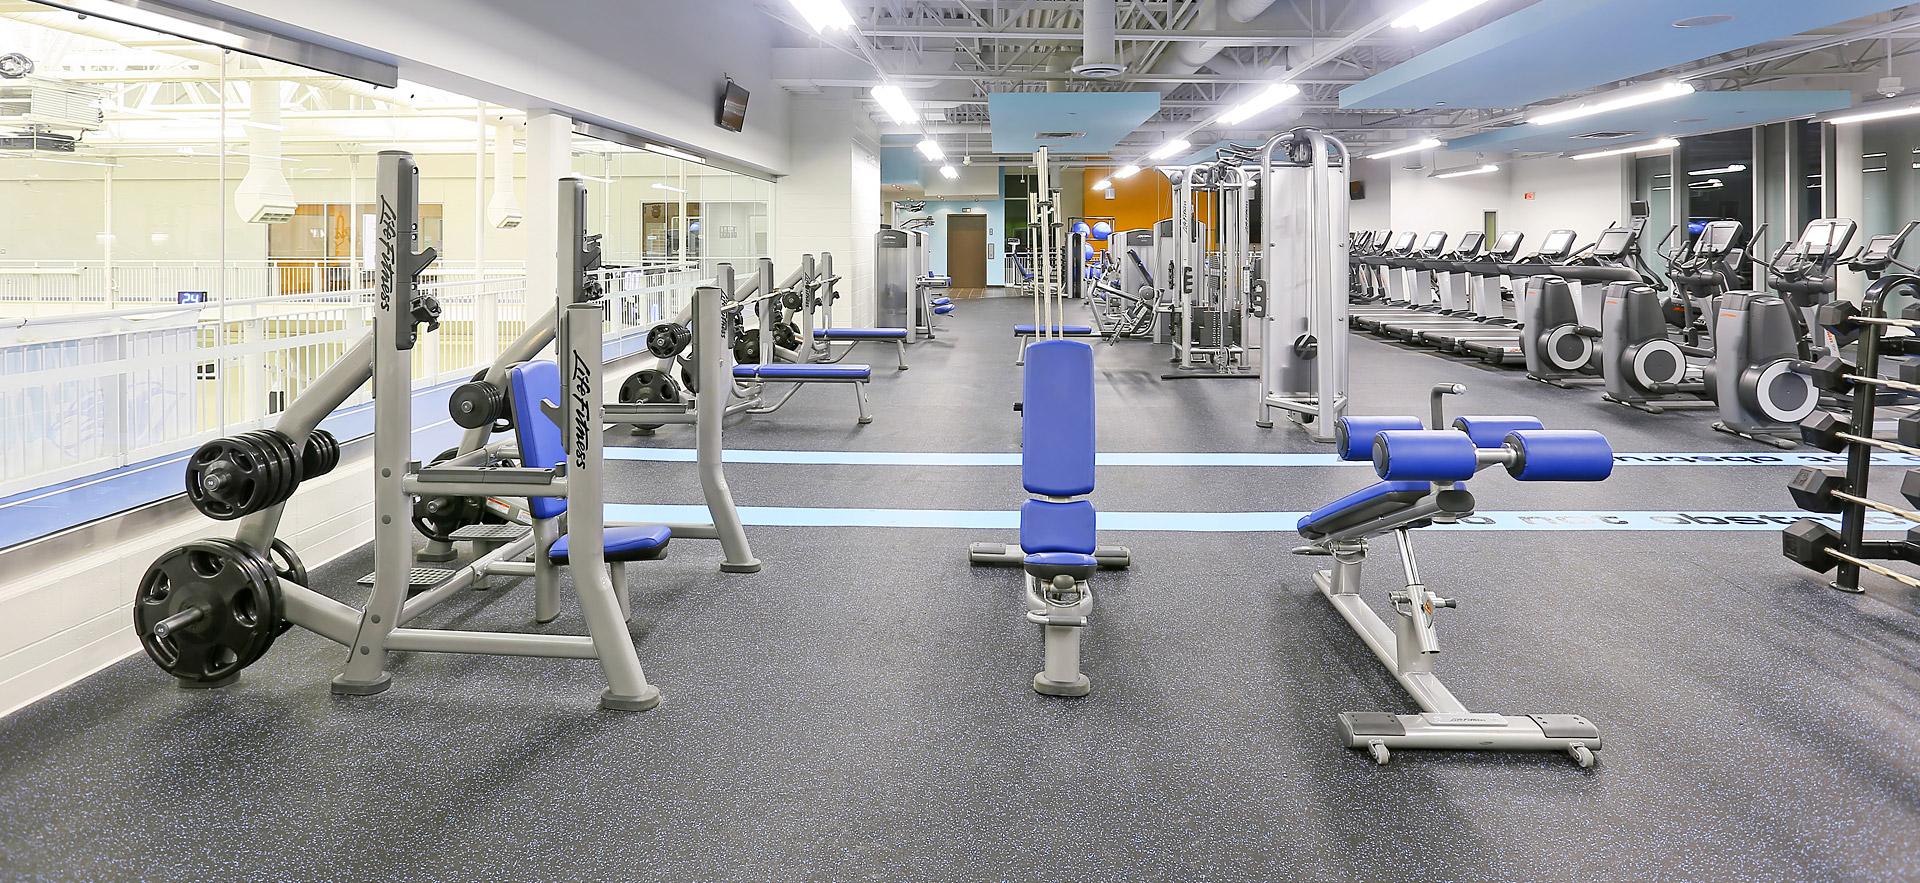 Interior view of the Sault College Fitness area.